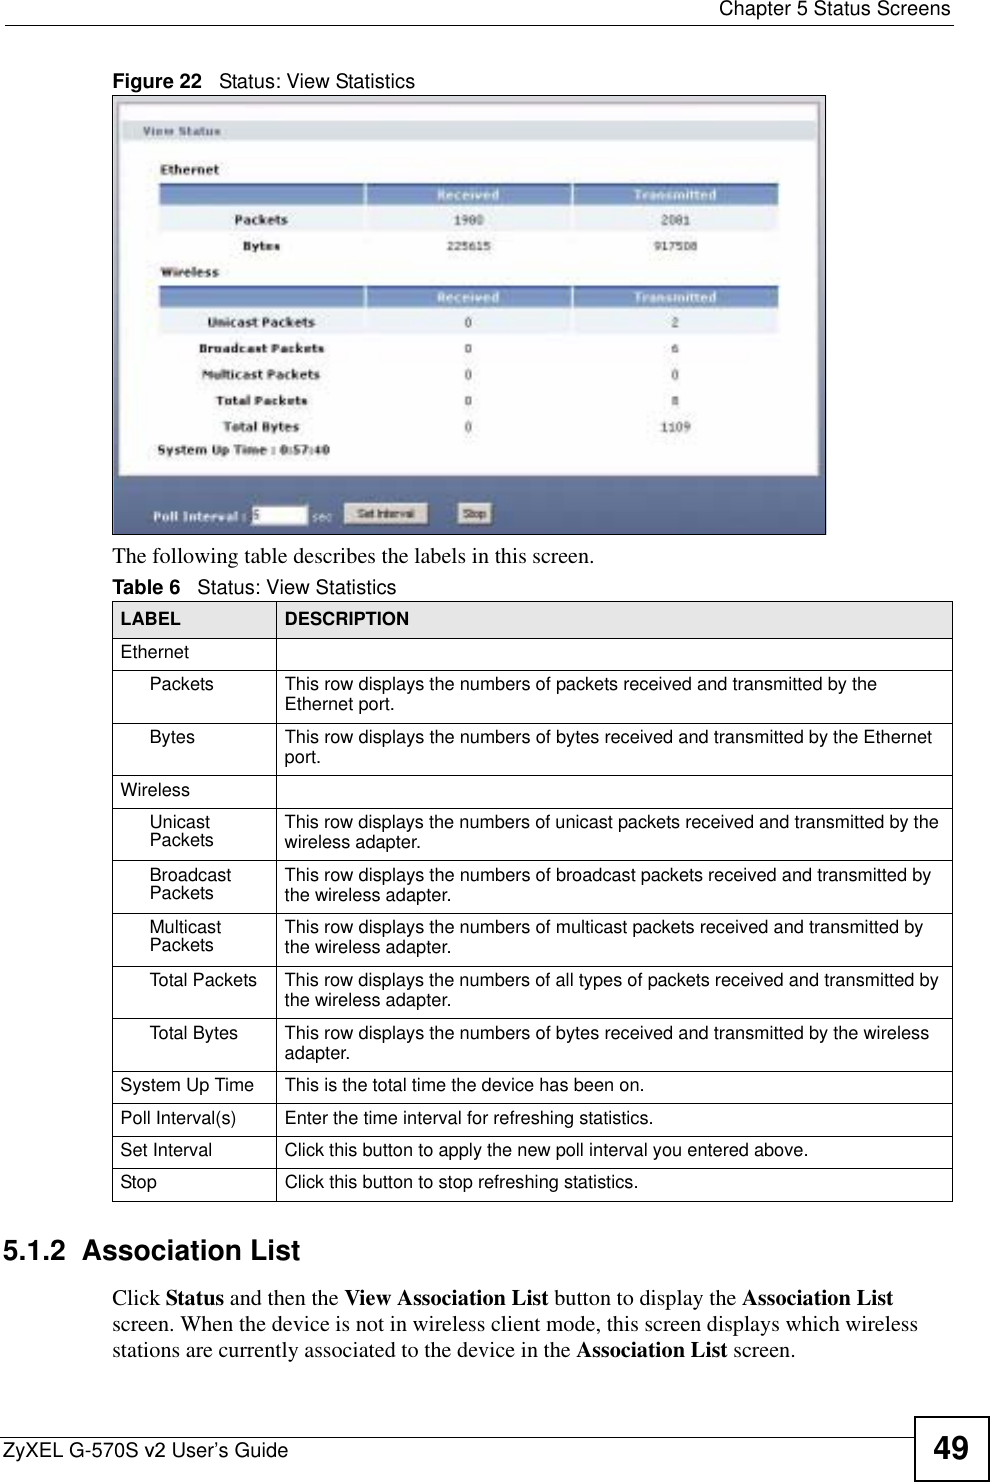  Chapter 5 Status ScreensZyXEL G-570S v2 User’s Guide 49Figure 22   Status: View StatisticsThe following table describes the labels in this screen. 5.1.2  Association List Click Status and then the View Association List button to display the Association Listscreen. When the device is not in wireless client mode, this screen displays which wireless stations are currently associated to the device in the Association List screen. Table 6   Status: View StatisticsLABEL DESCRIPTIONEthernetPackets This row displays the numbers of packets received and transmitted by the Ethernet port.Bytes This row displays the numbers of bytes received and transmitted by the Ethernet port.WirelessUnicastPackets This row displays the numbers of unicast packets received and transmitted by the wireless adapter.Broadcast Packets This row displays the numbers of broadcast packets received and transmitted by the wireless adapter.Multicast Packets This row displays the numbers of multicast packets received and transmitted by the wireless adapter.Total Packets This row displays the numbers of all types of packets received and transmitted by the wireless adapter.Total Bytes This row displays the numbers of bytes received and transmitted by the wireless adapter.System Up Time This is the total time the device has been on.Poll Interval(s) Enter the time interval for refreshing statistics.Set Interval Click this button to apply the new poll interval you entered above.Stop Click this button to stop refreshing statistics.